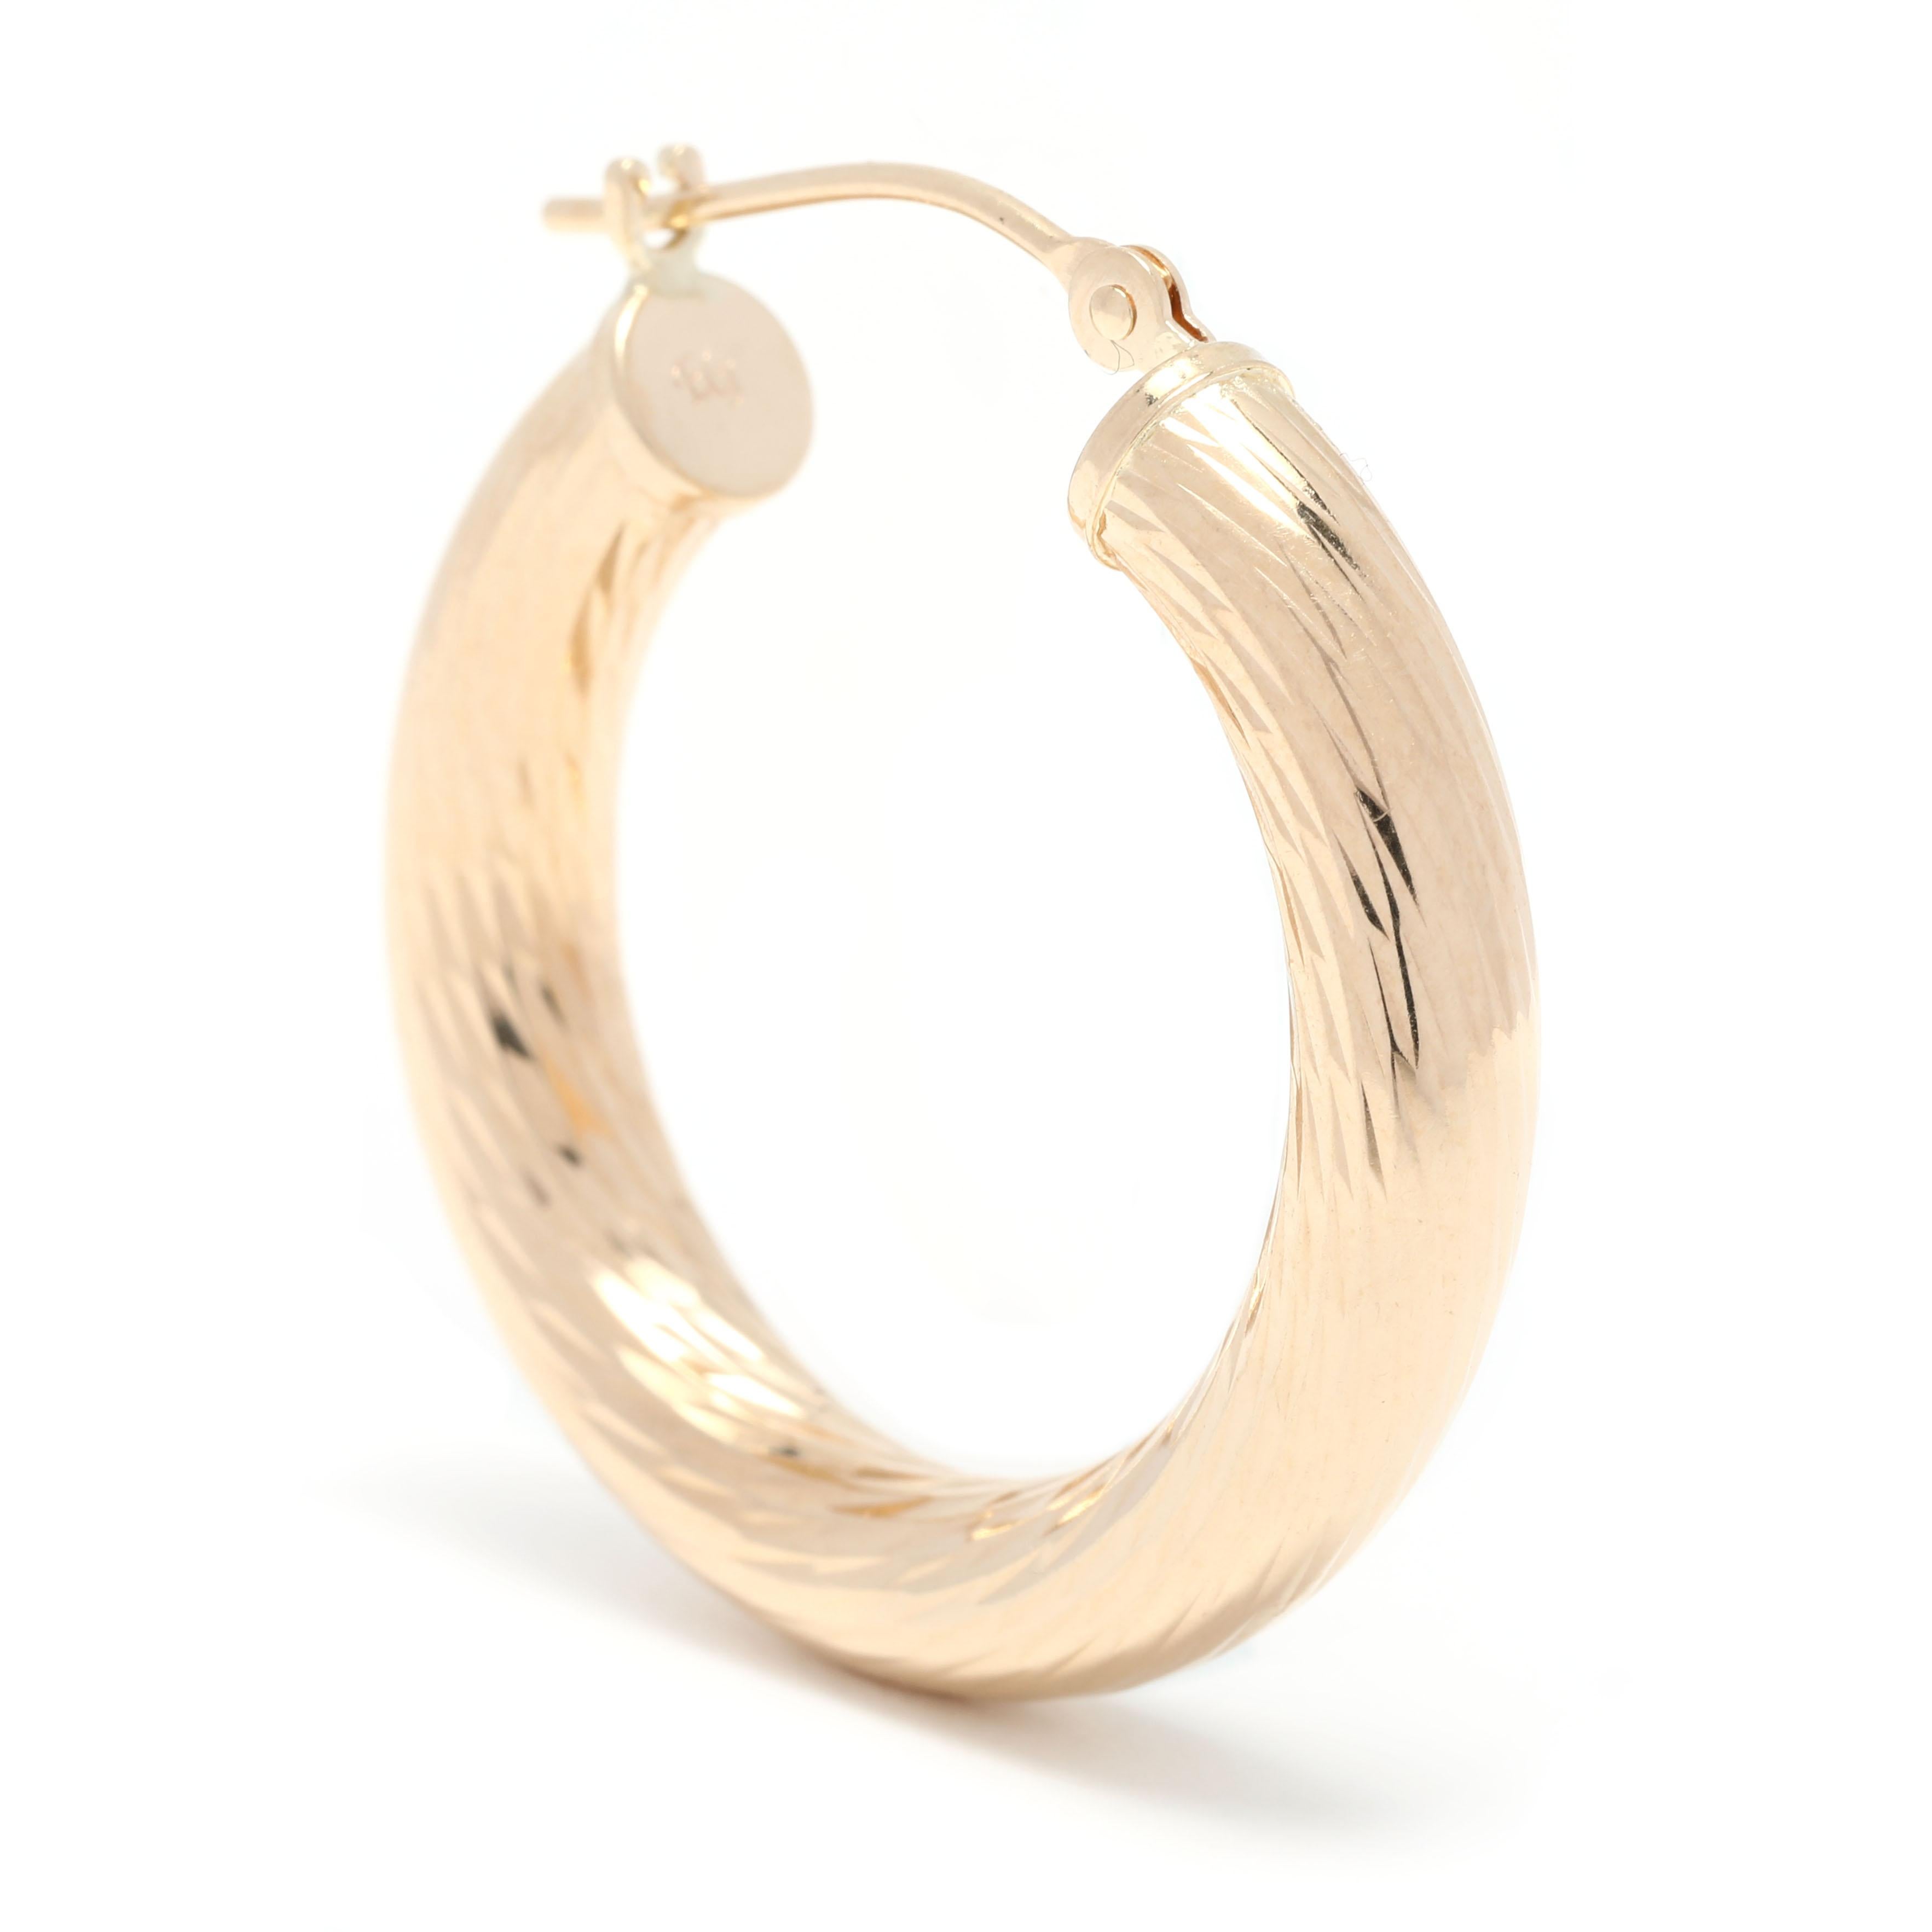 Look great in any moment with these 14K yellow gold medium twist hoop earrings. The perfect accessory for any outfit, these timeless 4mm gold hoops measure 1 inch in length and feature a simple, classic design. Show off your style with these